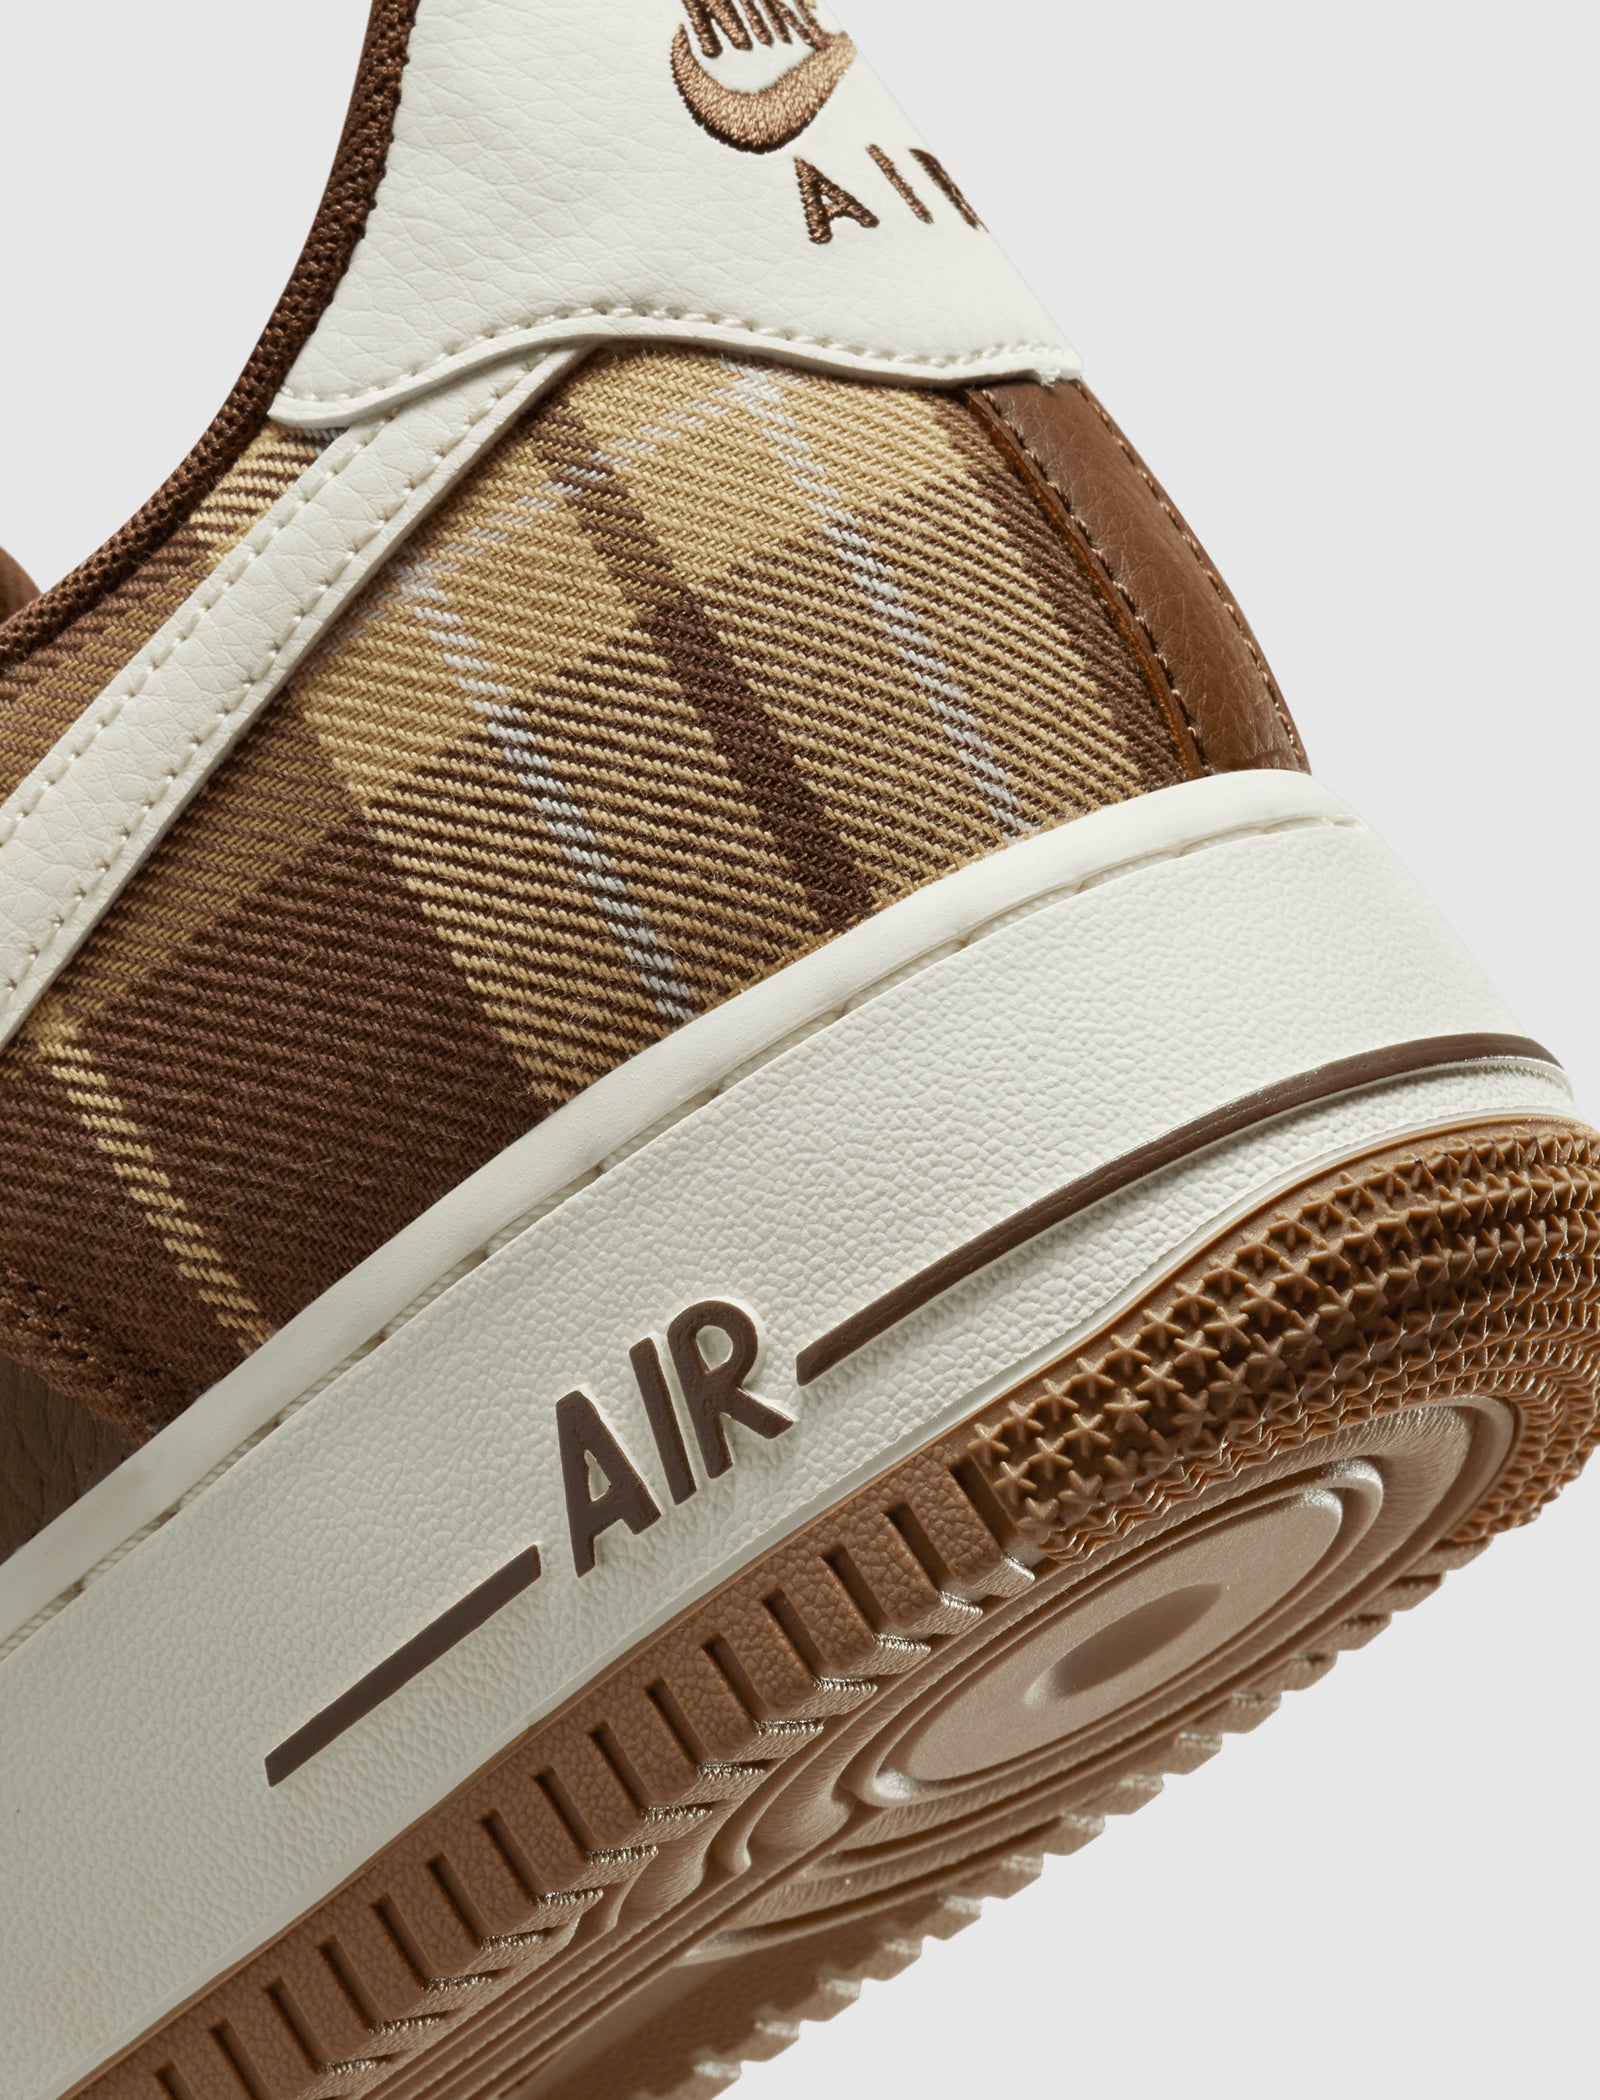 AIR FORCE 1 '07 LX LOW PLAID CACAO – APB Store